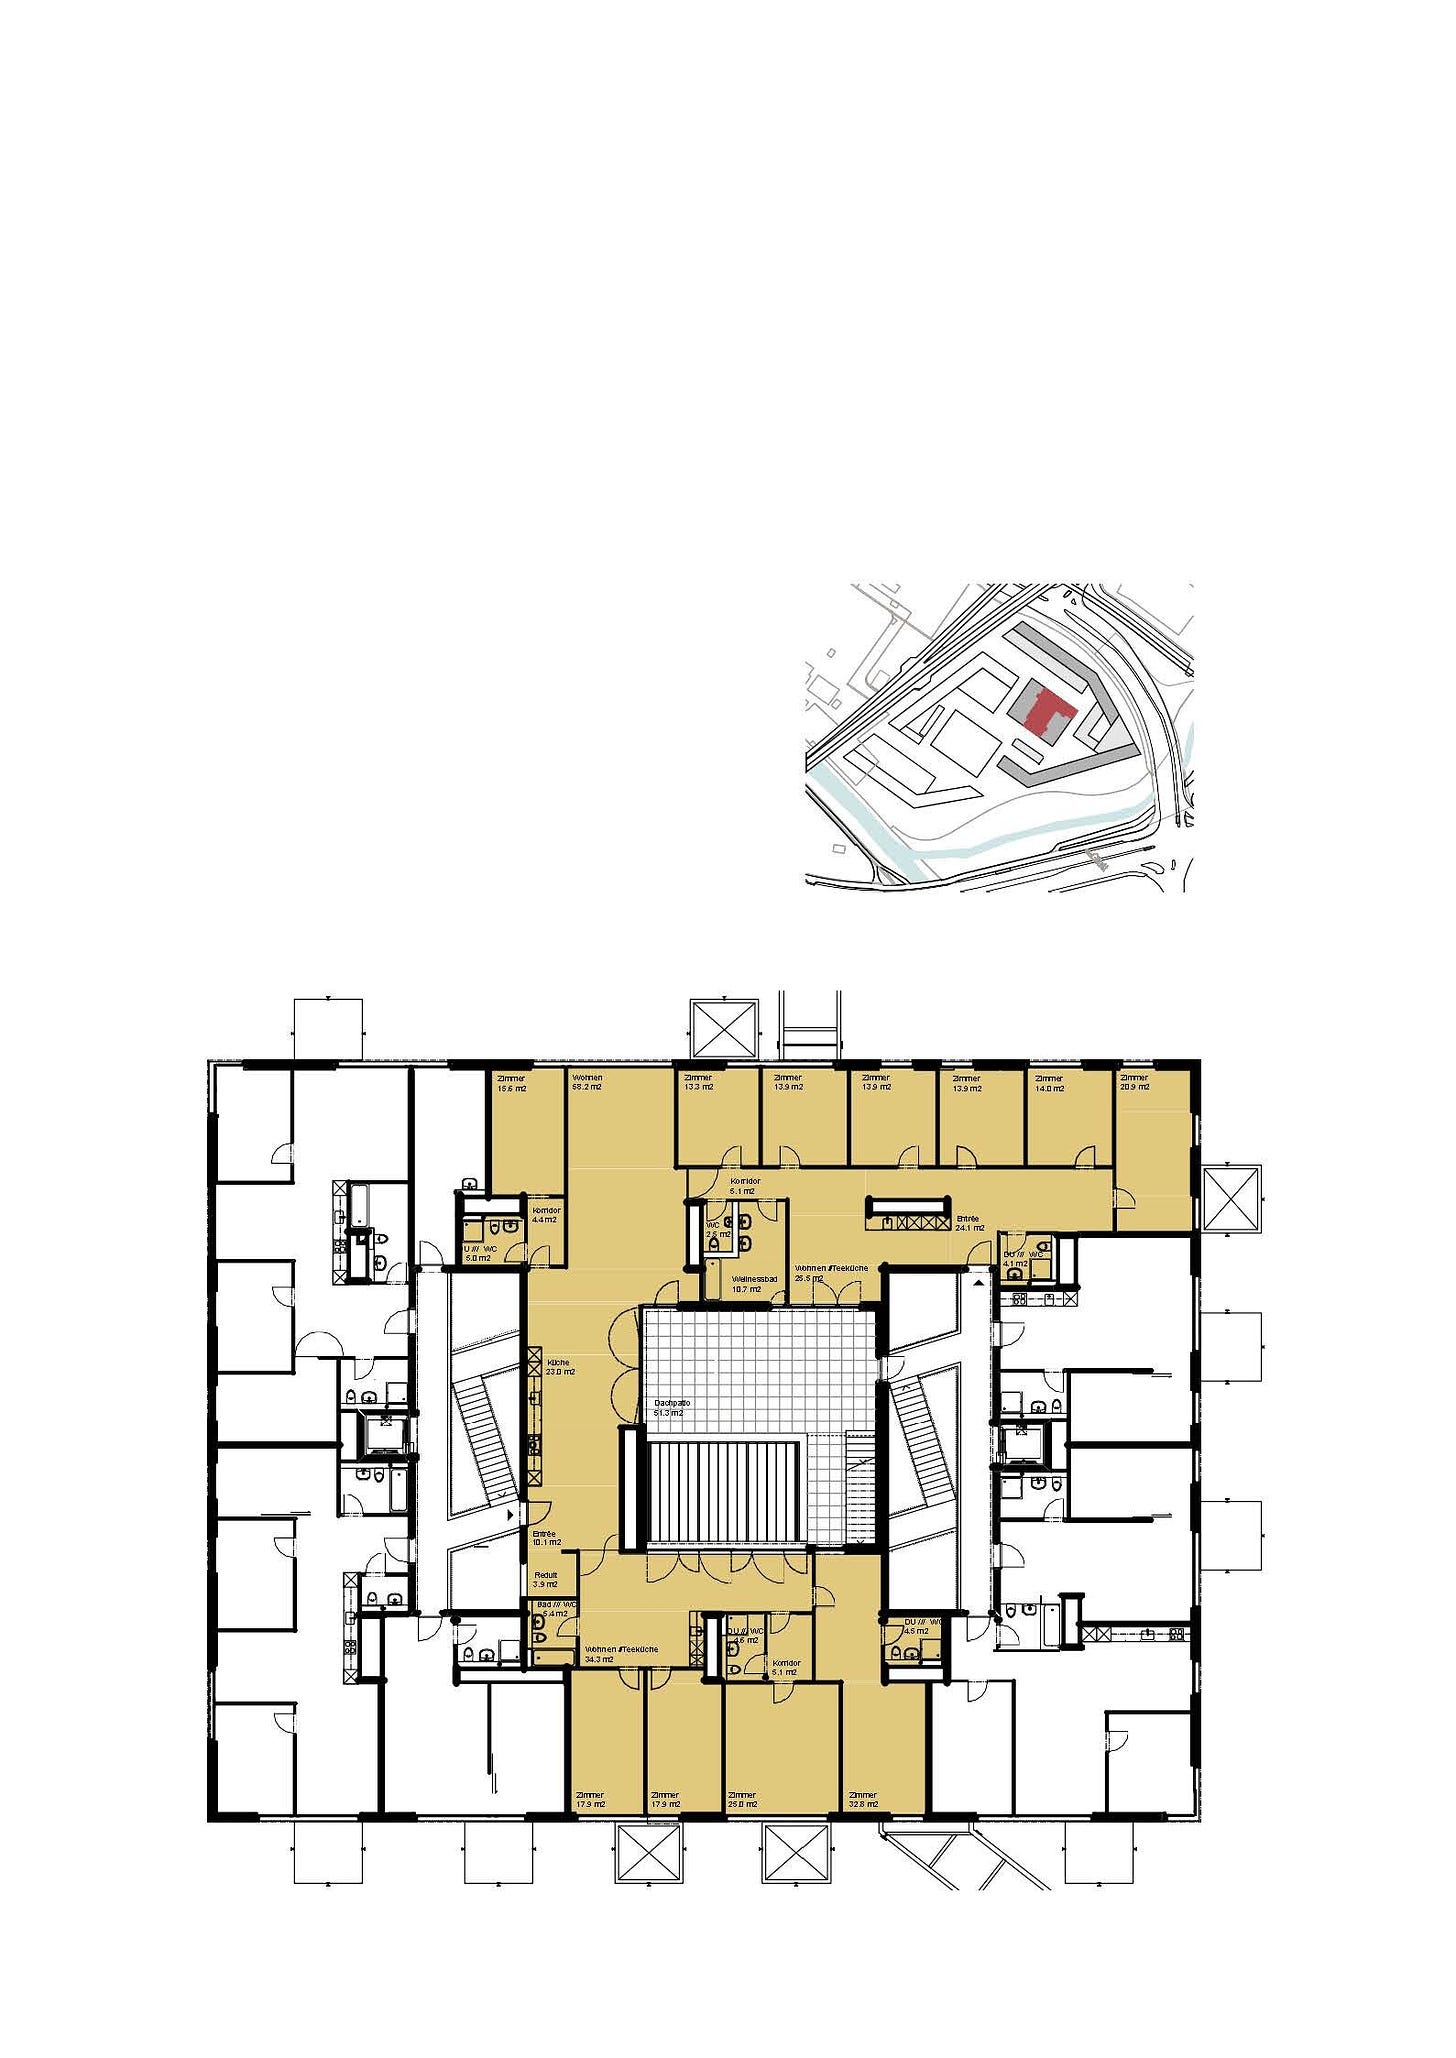 Figure 6. Zwicky Süd was completed in 2015, designed by Schneider Studer Primas, selected through an invited competition process. The project includes a single extra-large apartment. Its multiple entries, kitchens, bathrooms, and central patio allow like-minded individuals to share generous amenities while ensuring their privacy, as this floor plan shows. Courtesy of Bau- und Wohngenossenschaft Kraftwerk1.